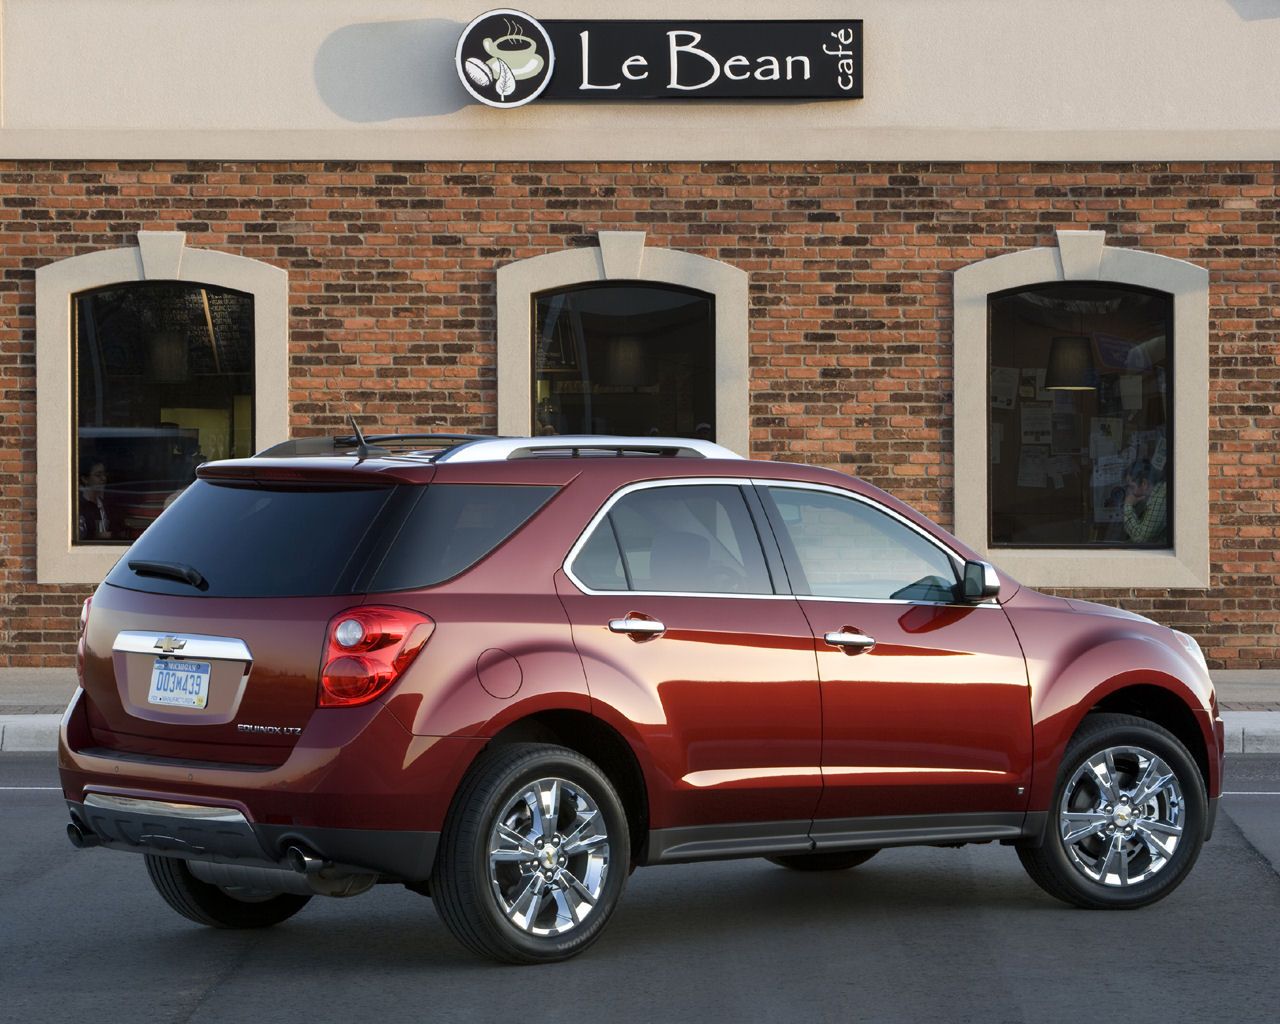 2012 Chevrolet Equinox Rear Angle (View 3 of 6)